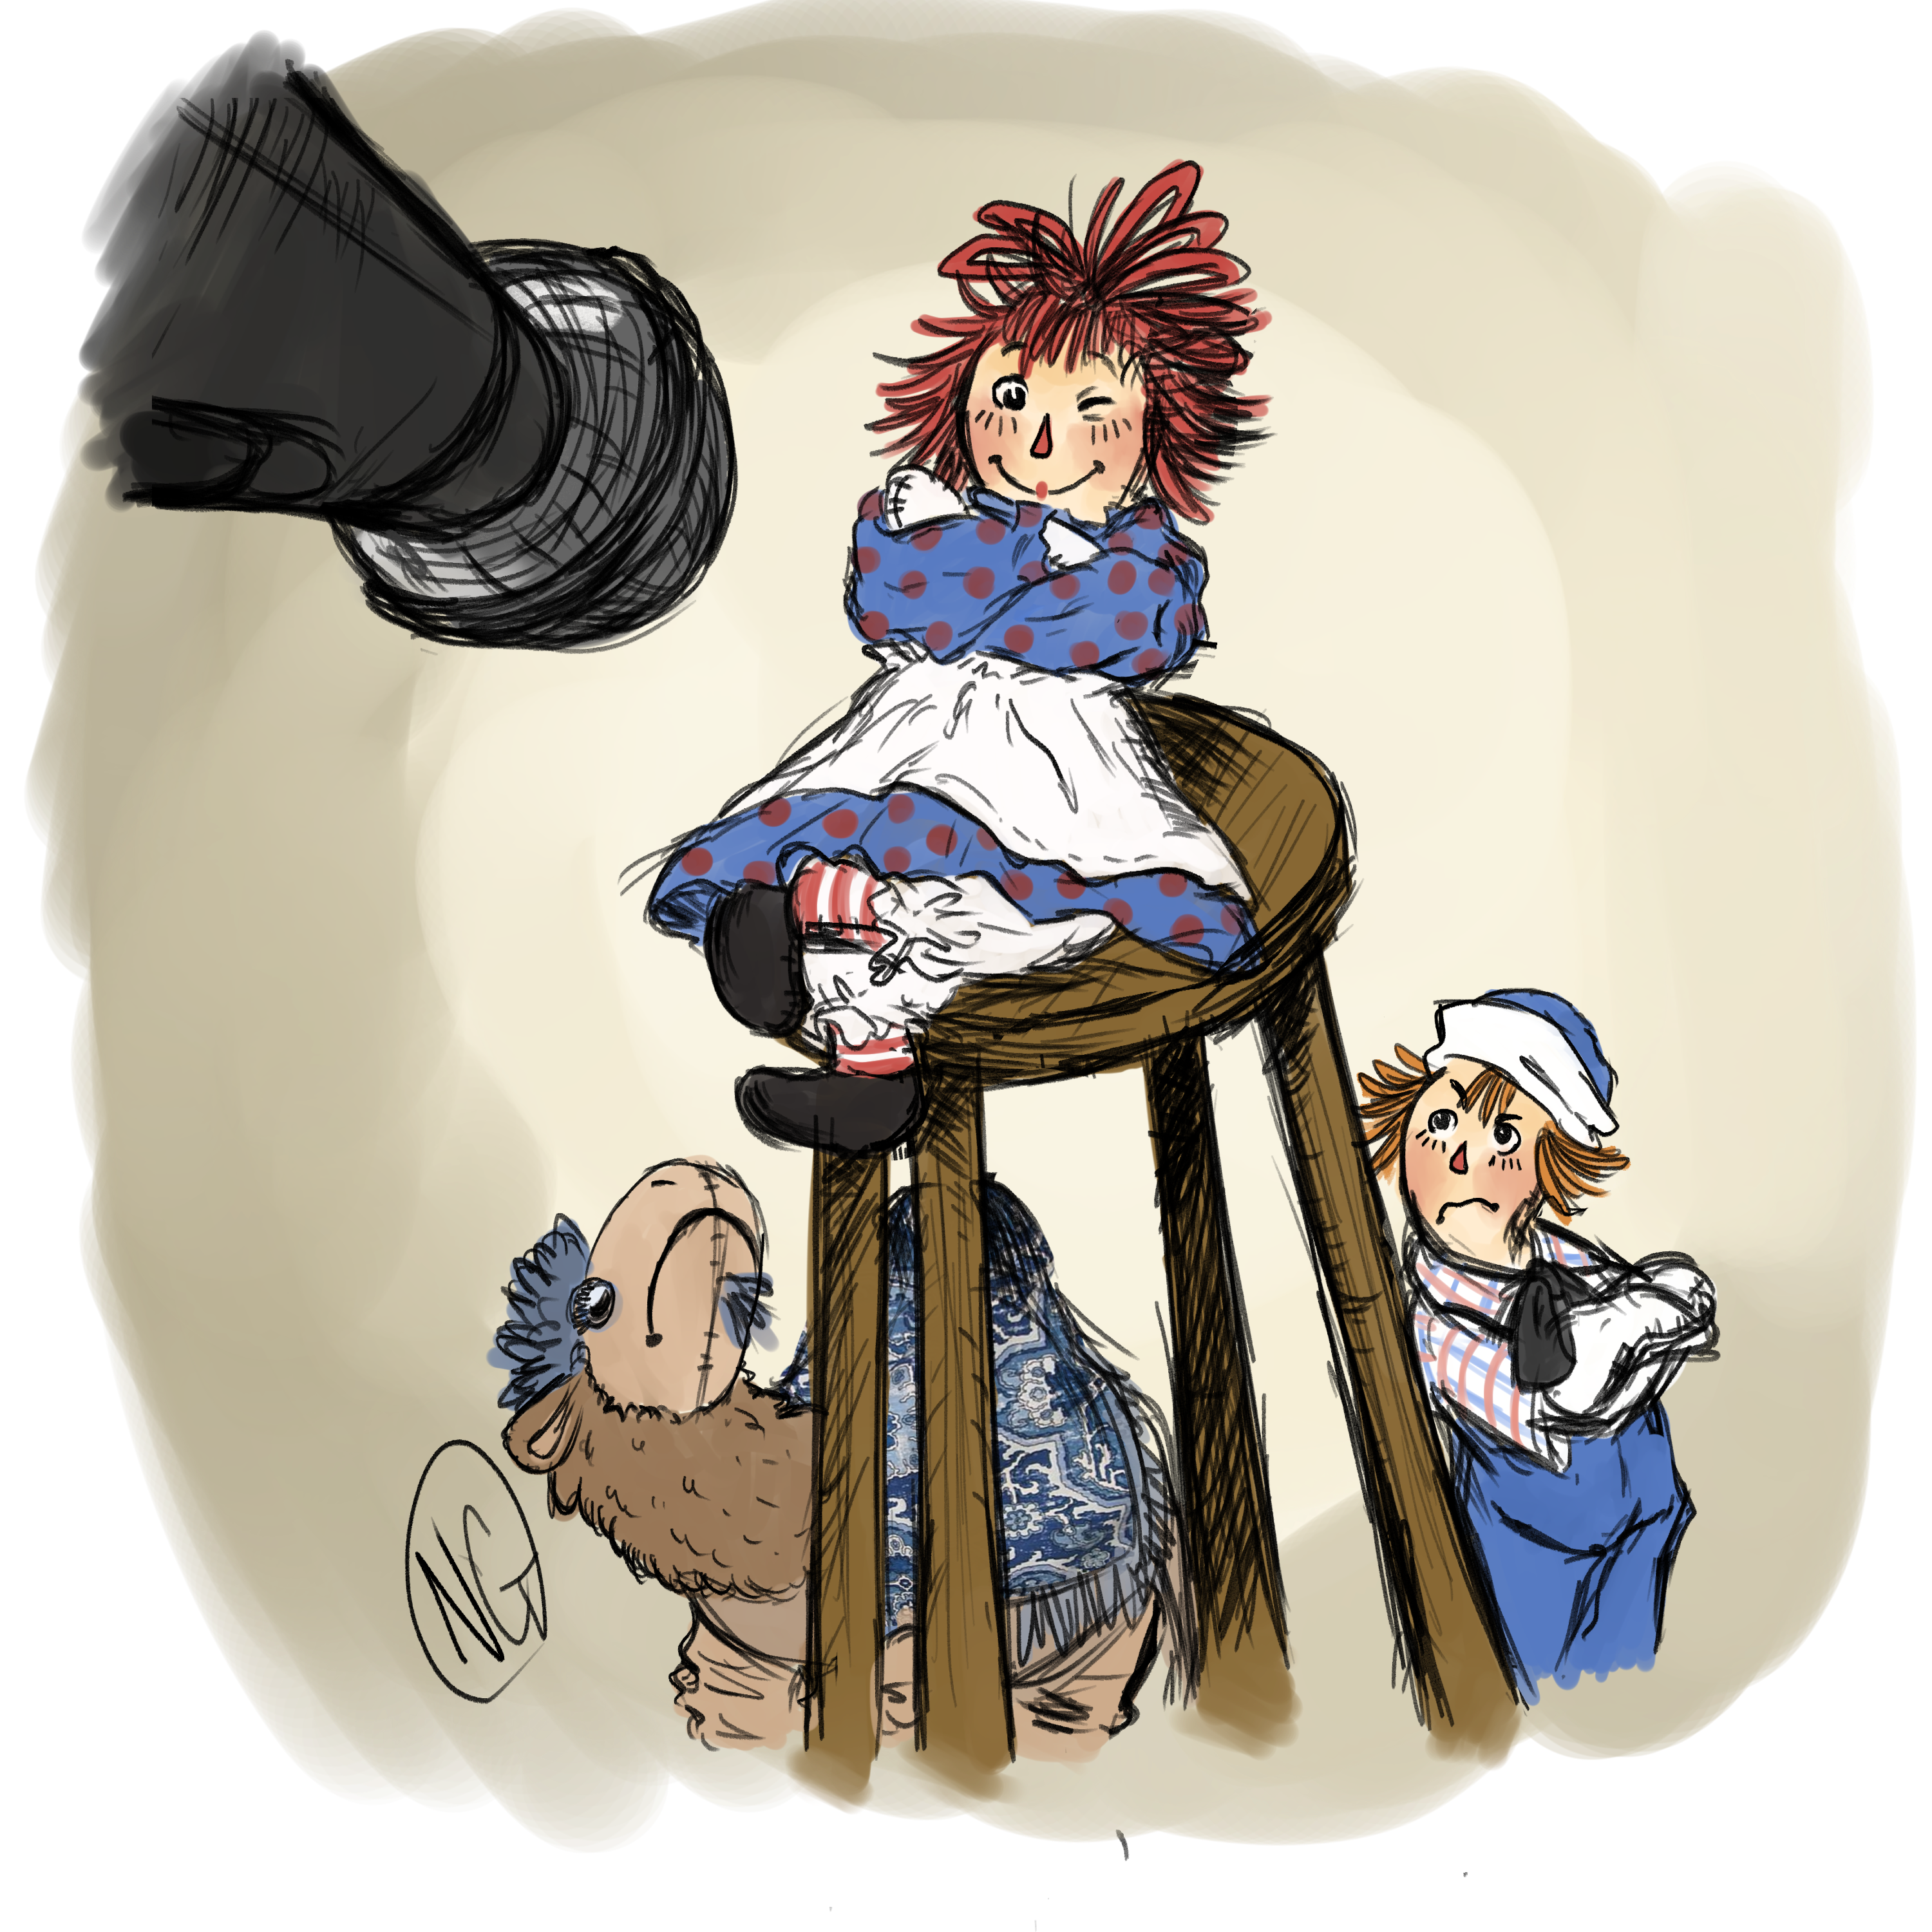 A digital drawing. Raggedy Ann sits on a stool in front of a microphone, grinning and winking. Raggedy Andy and The Camel with the Wrinkled Knees stand below, looking up at her with jealousy and anxiety, respectively.